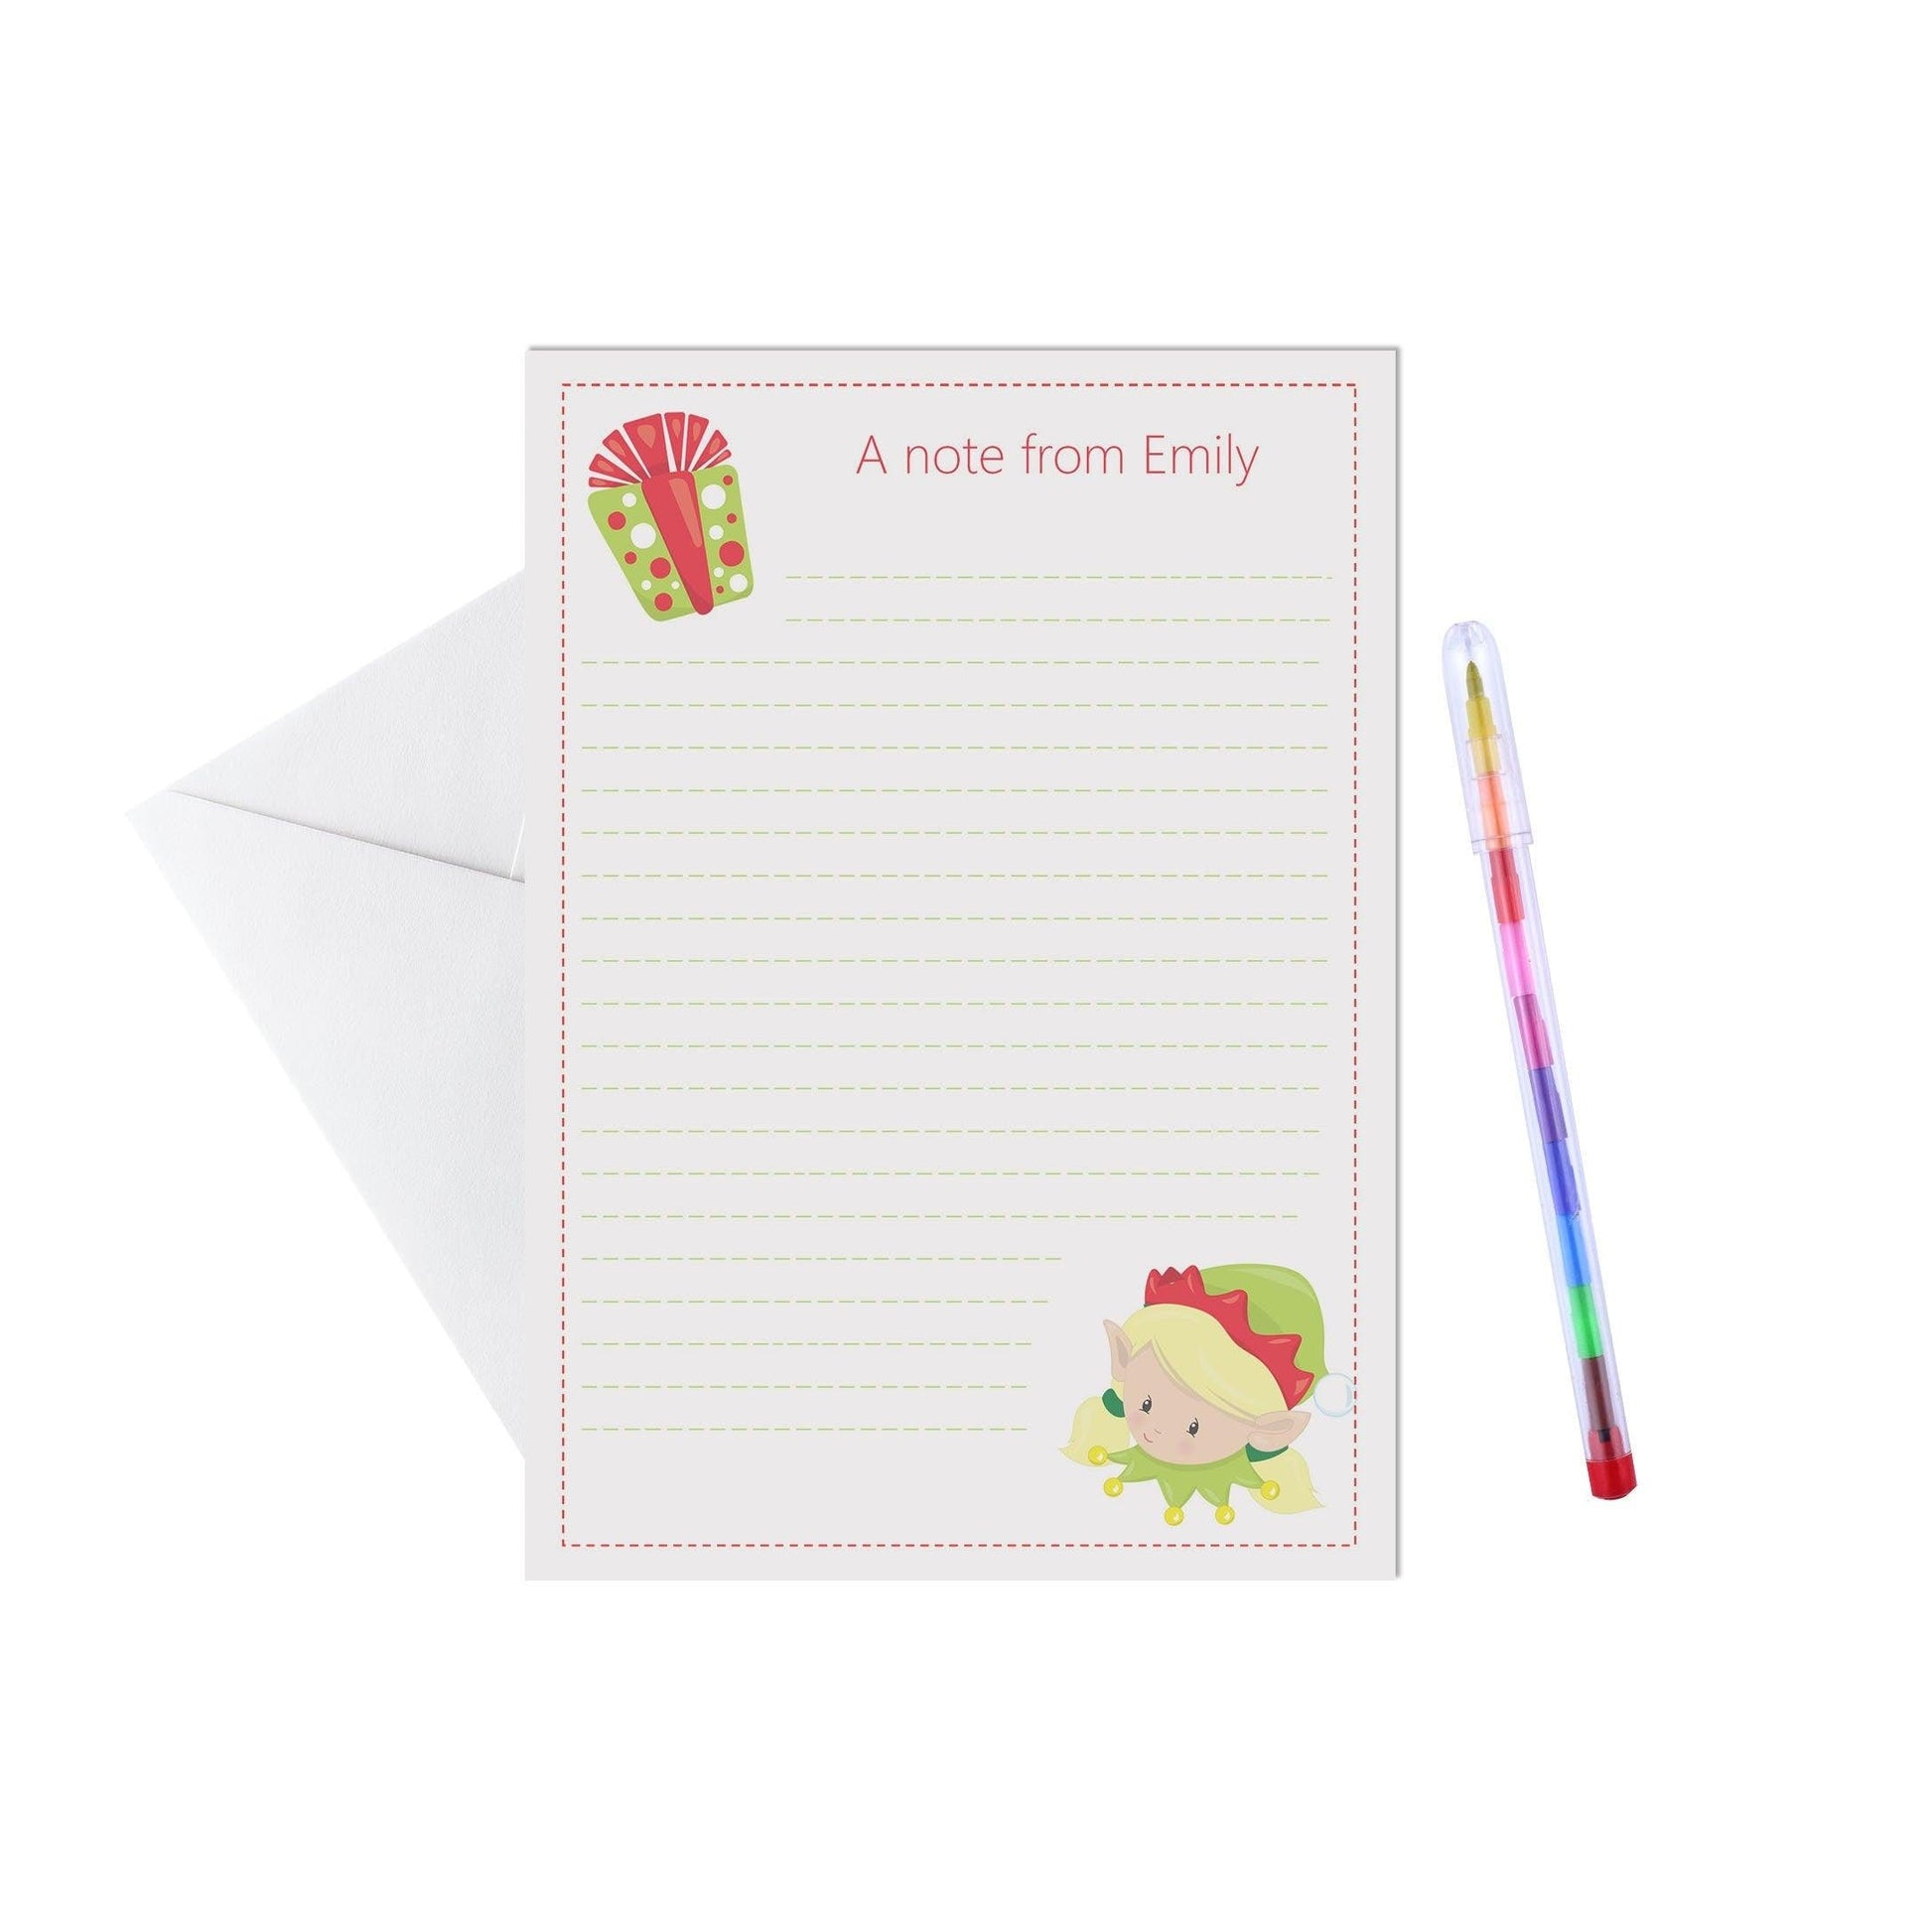  Elf girl personalised writing set / notelets. Pack of 15, A5 sheets & envelopes by PMPRINTED 